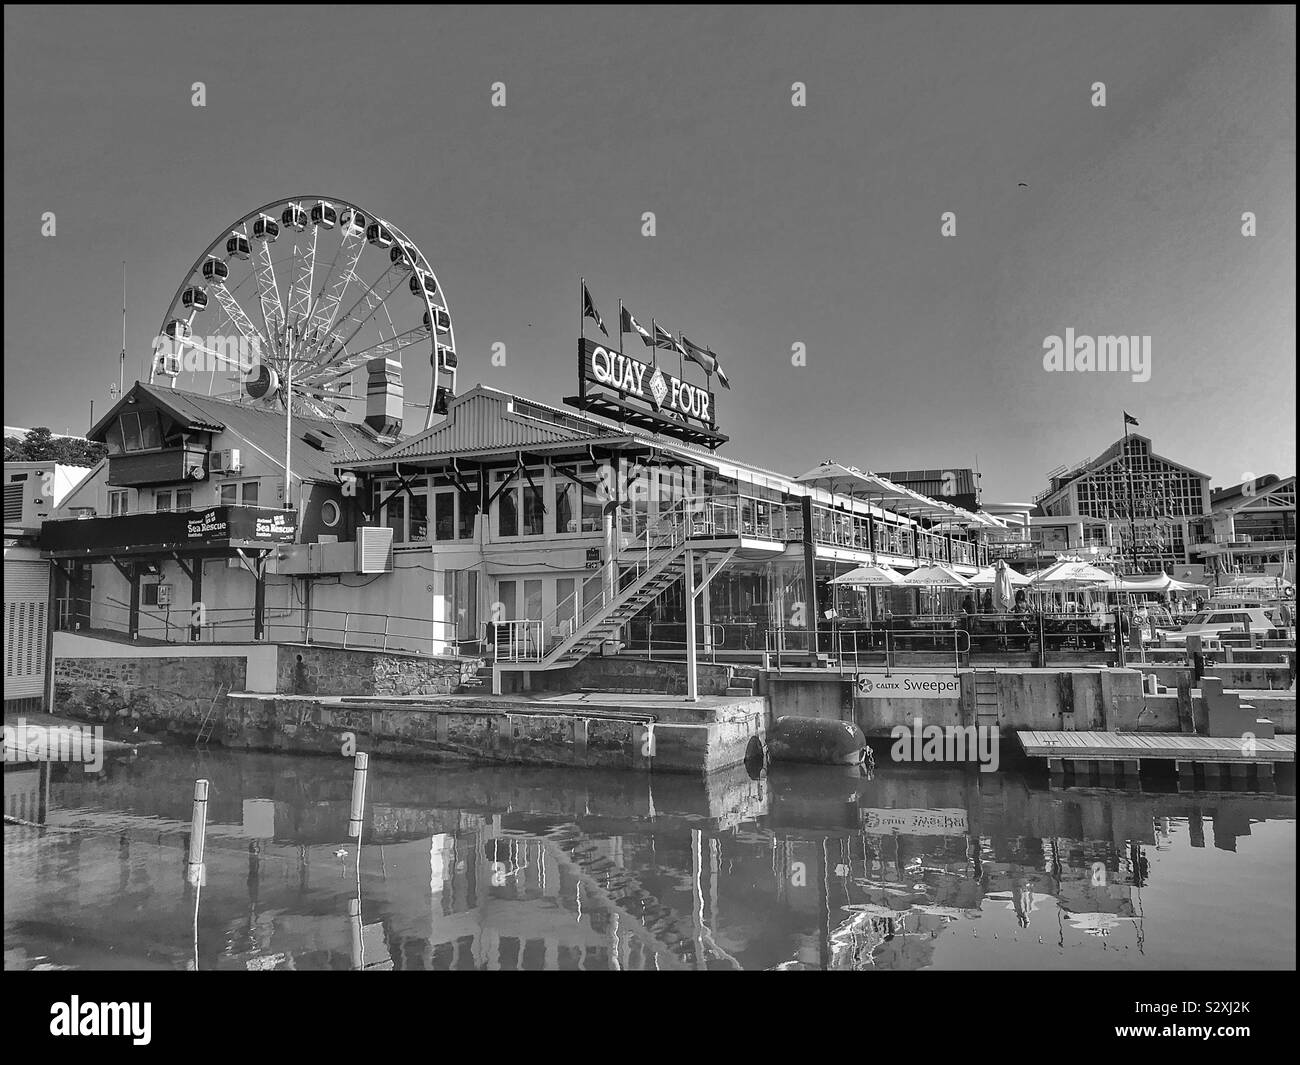 V&A Waterfront, Cape Town, South Africa. Black and white photo. Stock Photo